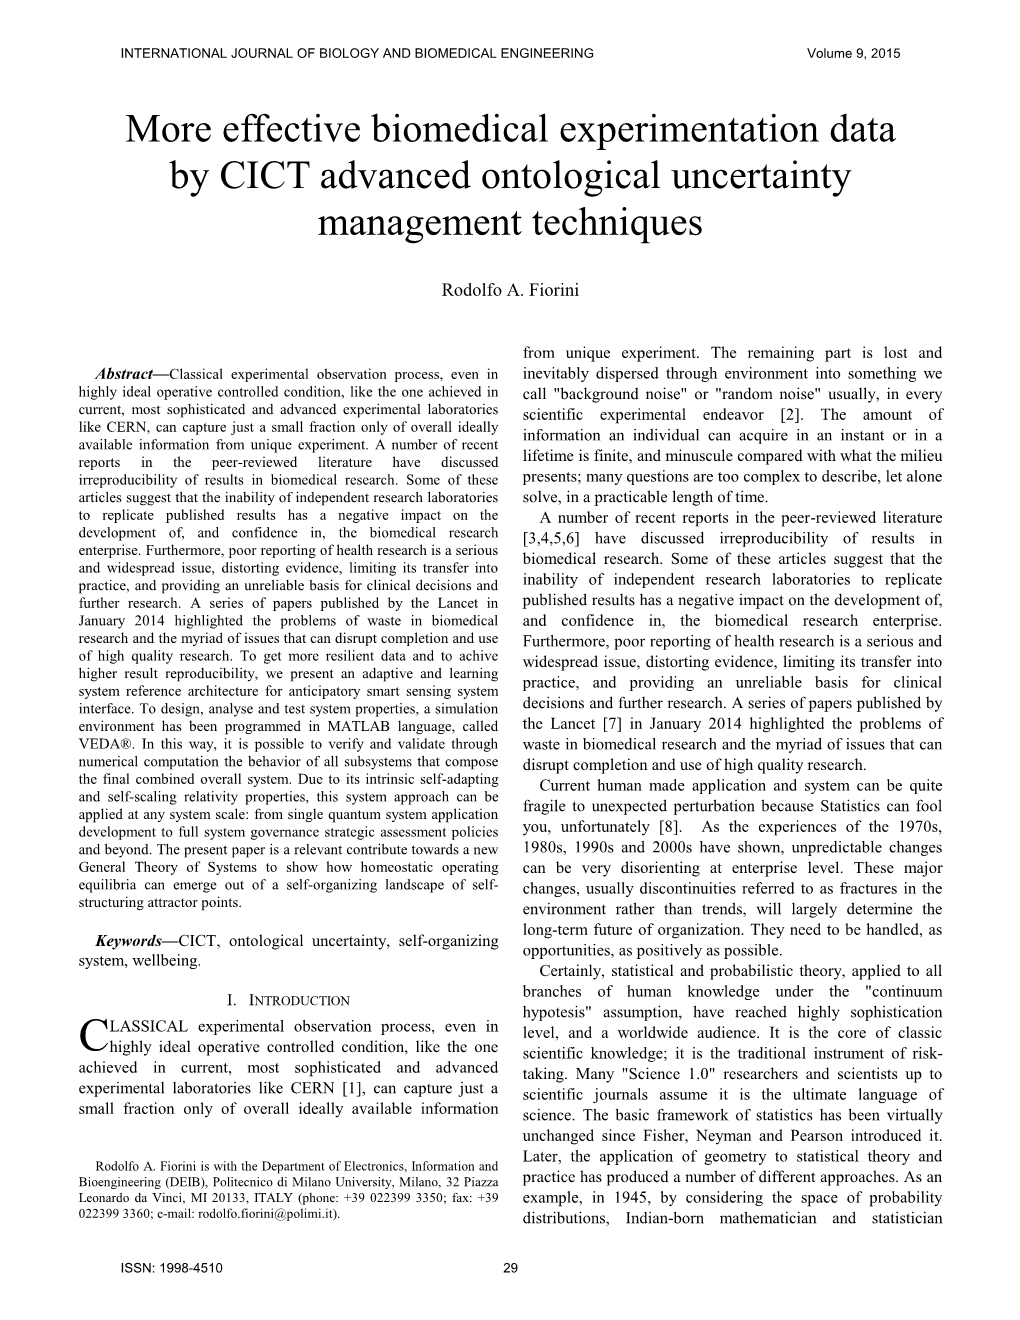 Effective Biomedical Experimentation Data by CICT Advanced Ontological Uncertainty Management Techniques